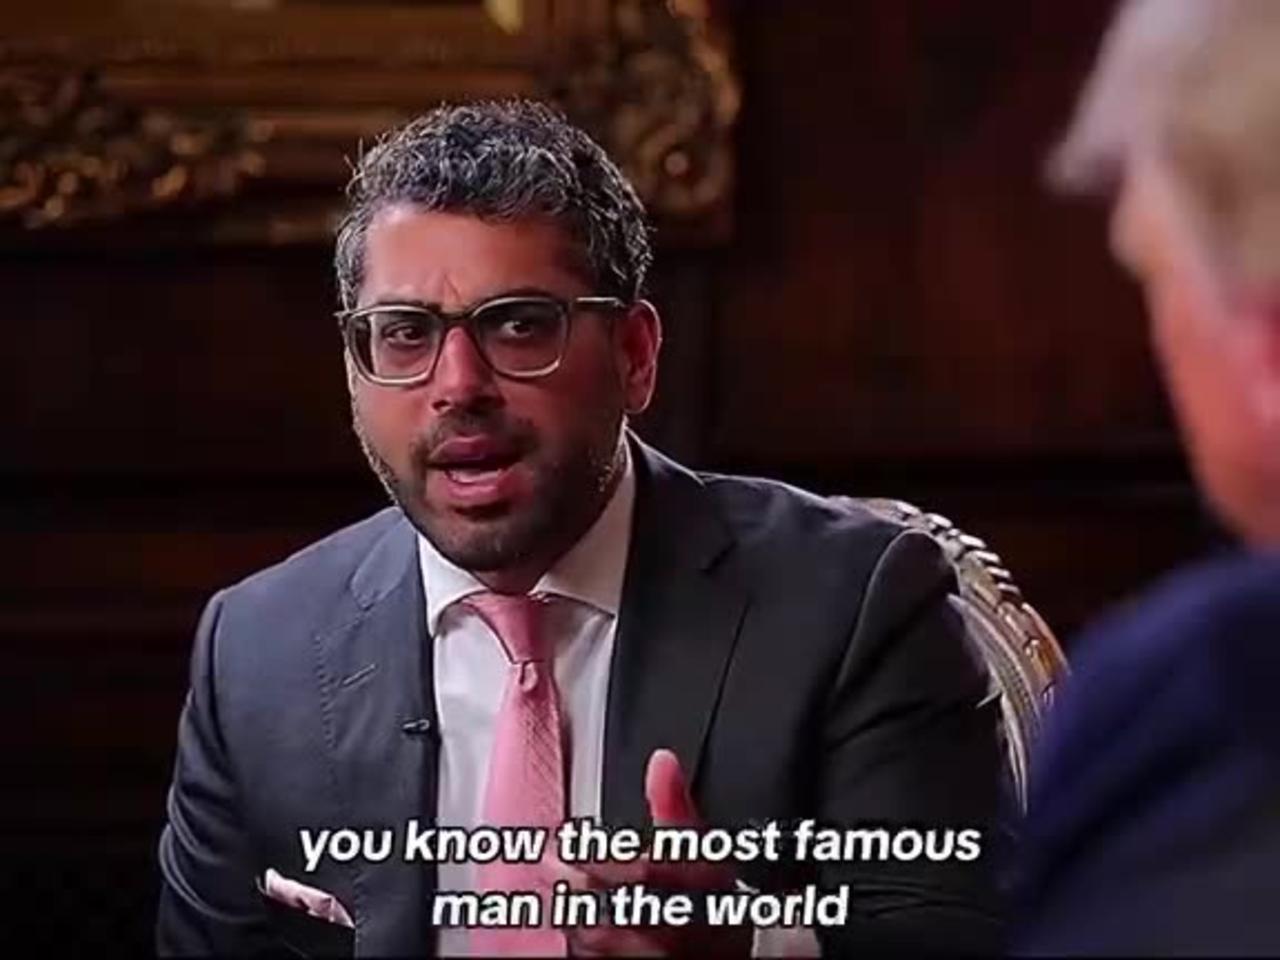 Donald Trump talks about how he's the most FAMOUS person in the world...